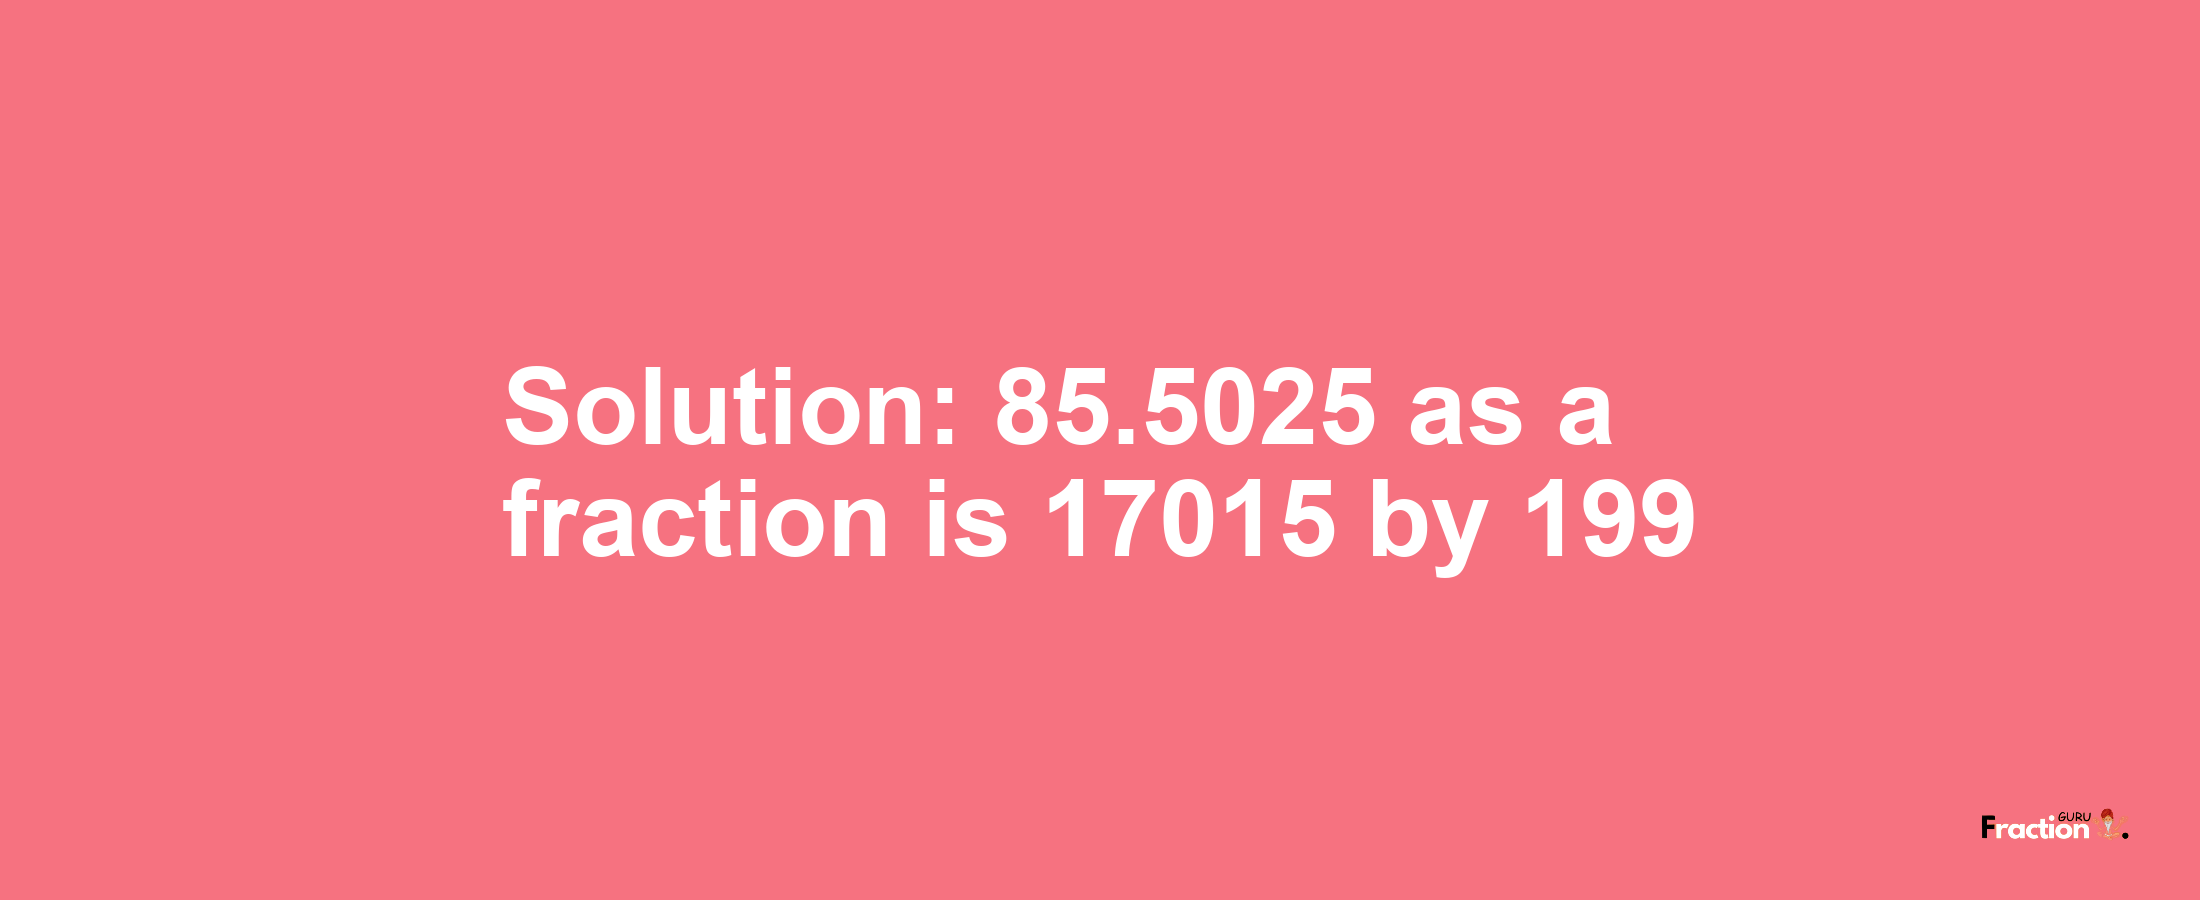 Solution:85.5025 as a fraction is 17015/199